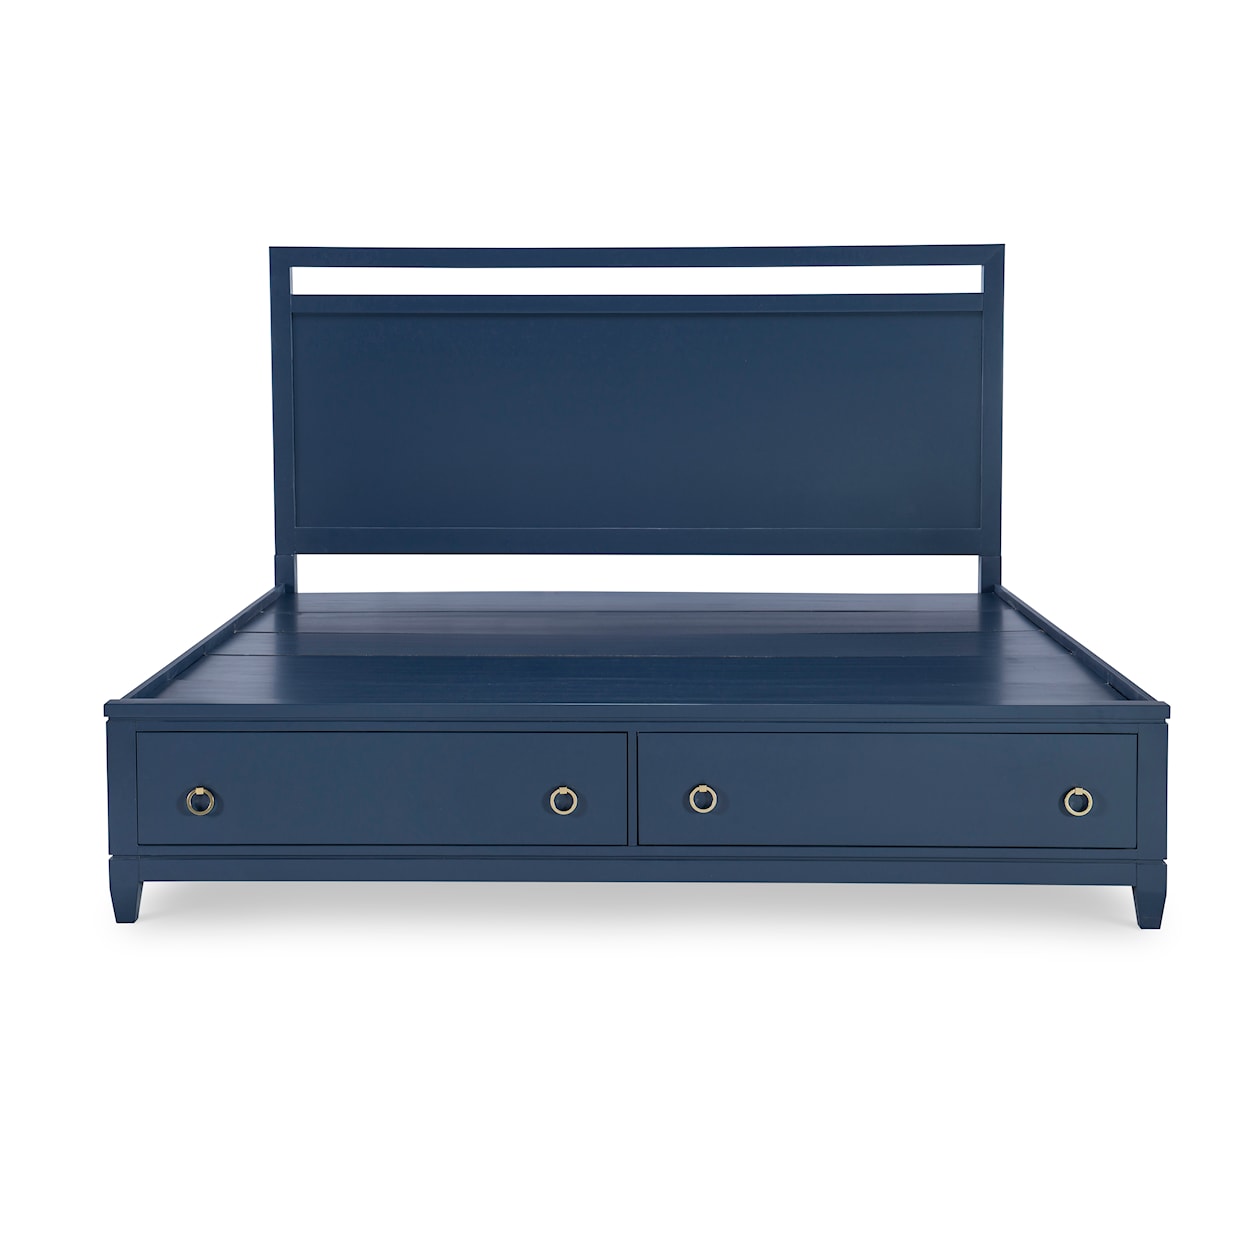 Legacy Classic Summerland Queen Storage Bed